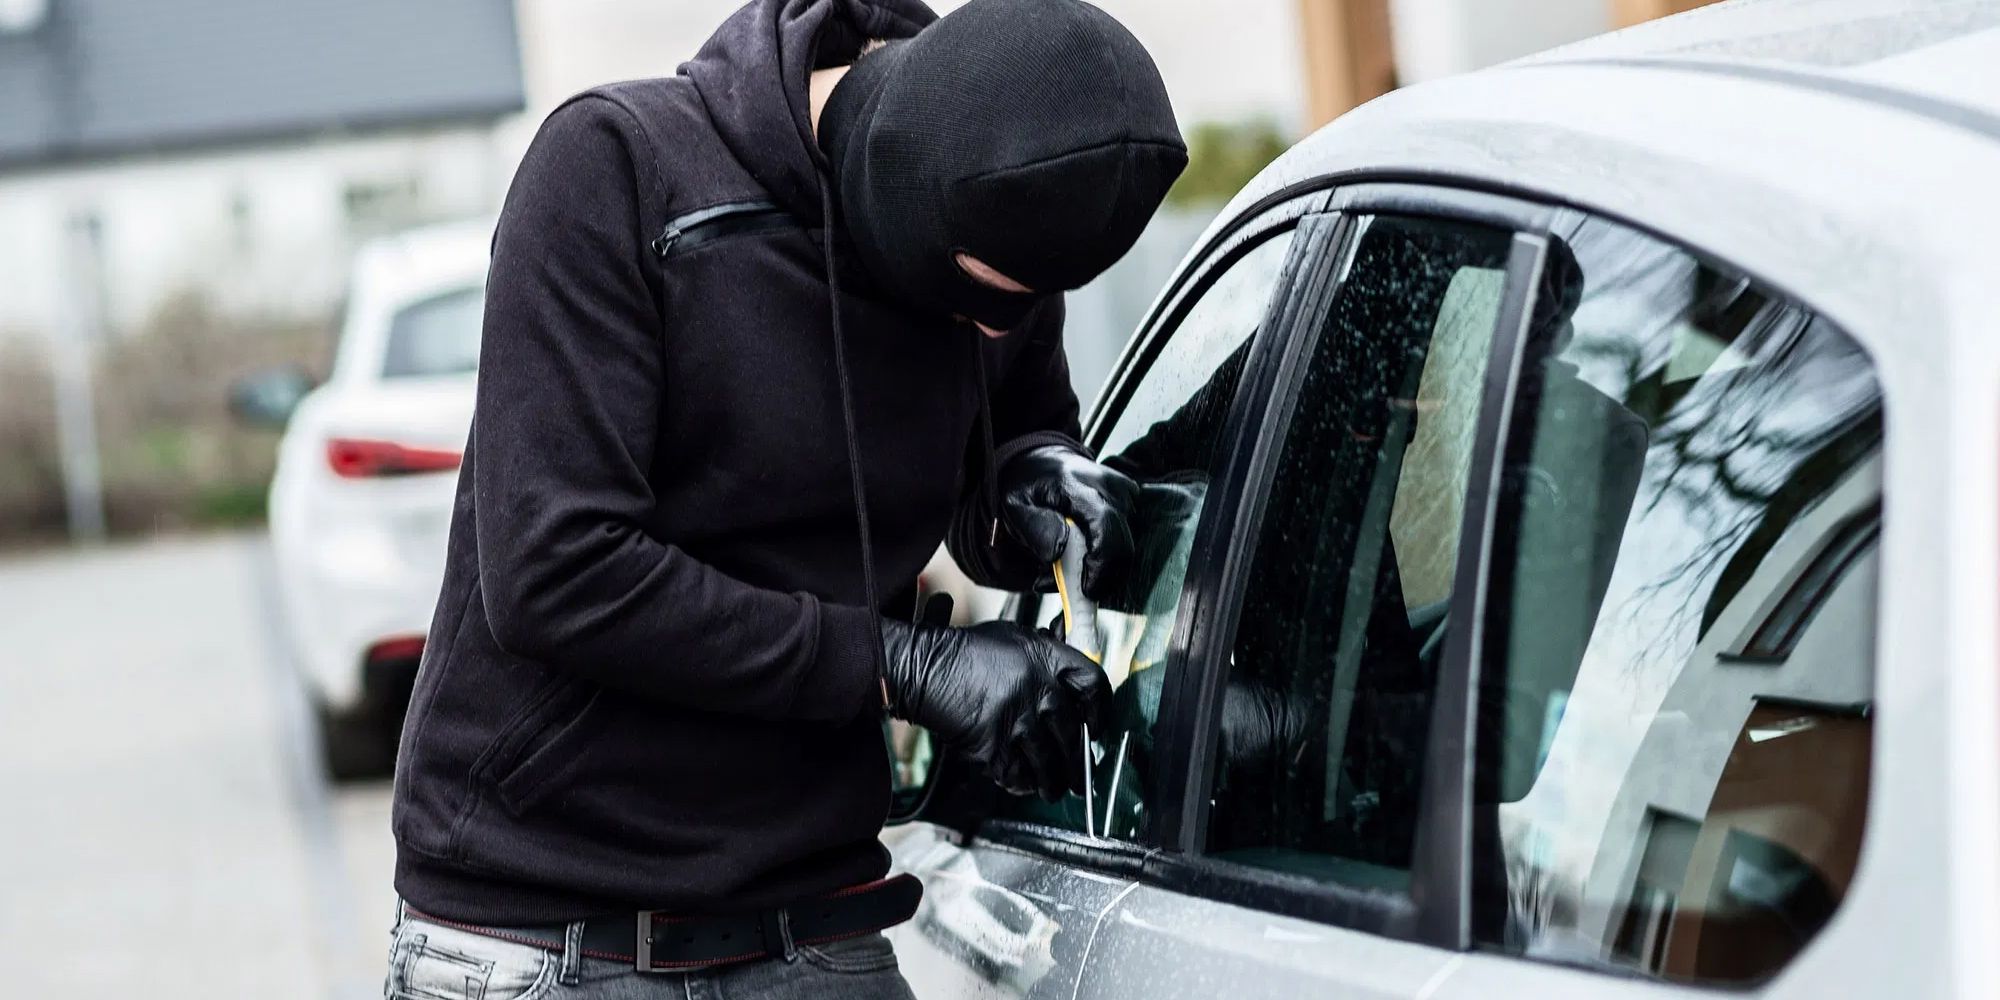 10 Proven Anti Theft Methods To Prevent Car Thefts And Break Ins On Any